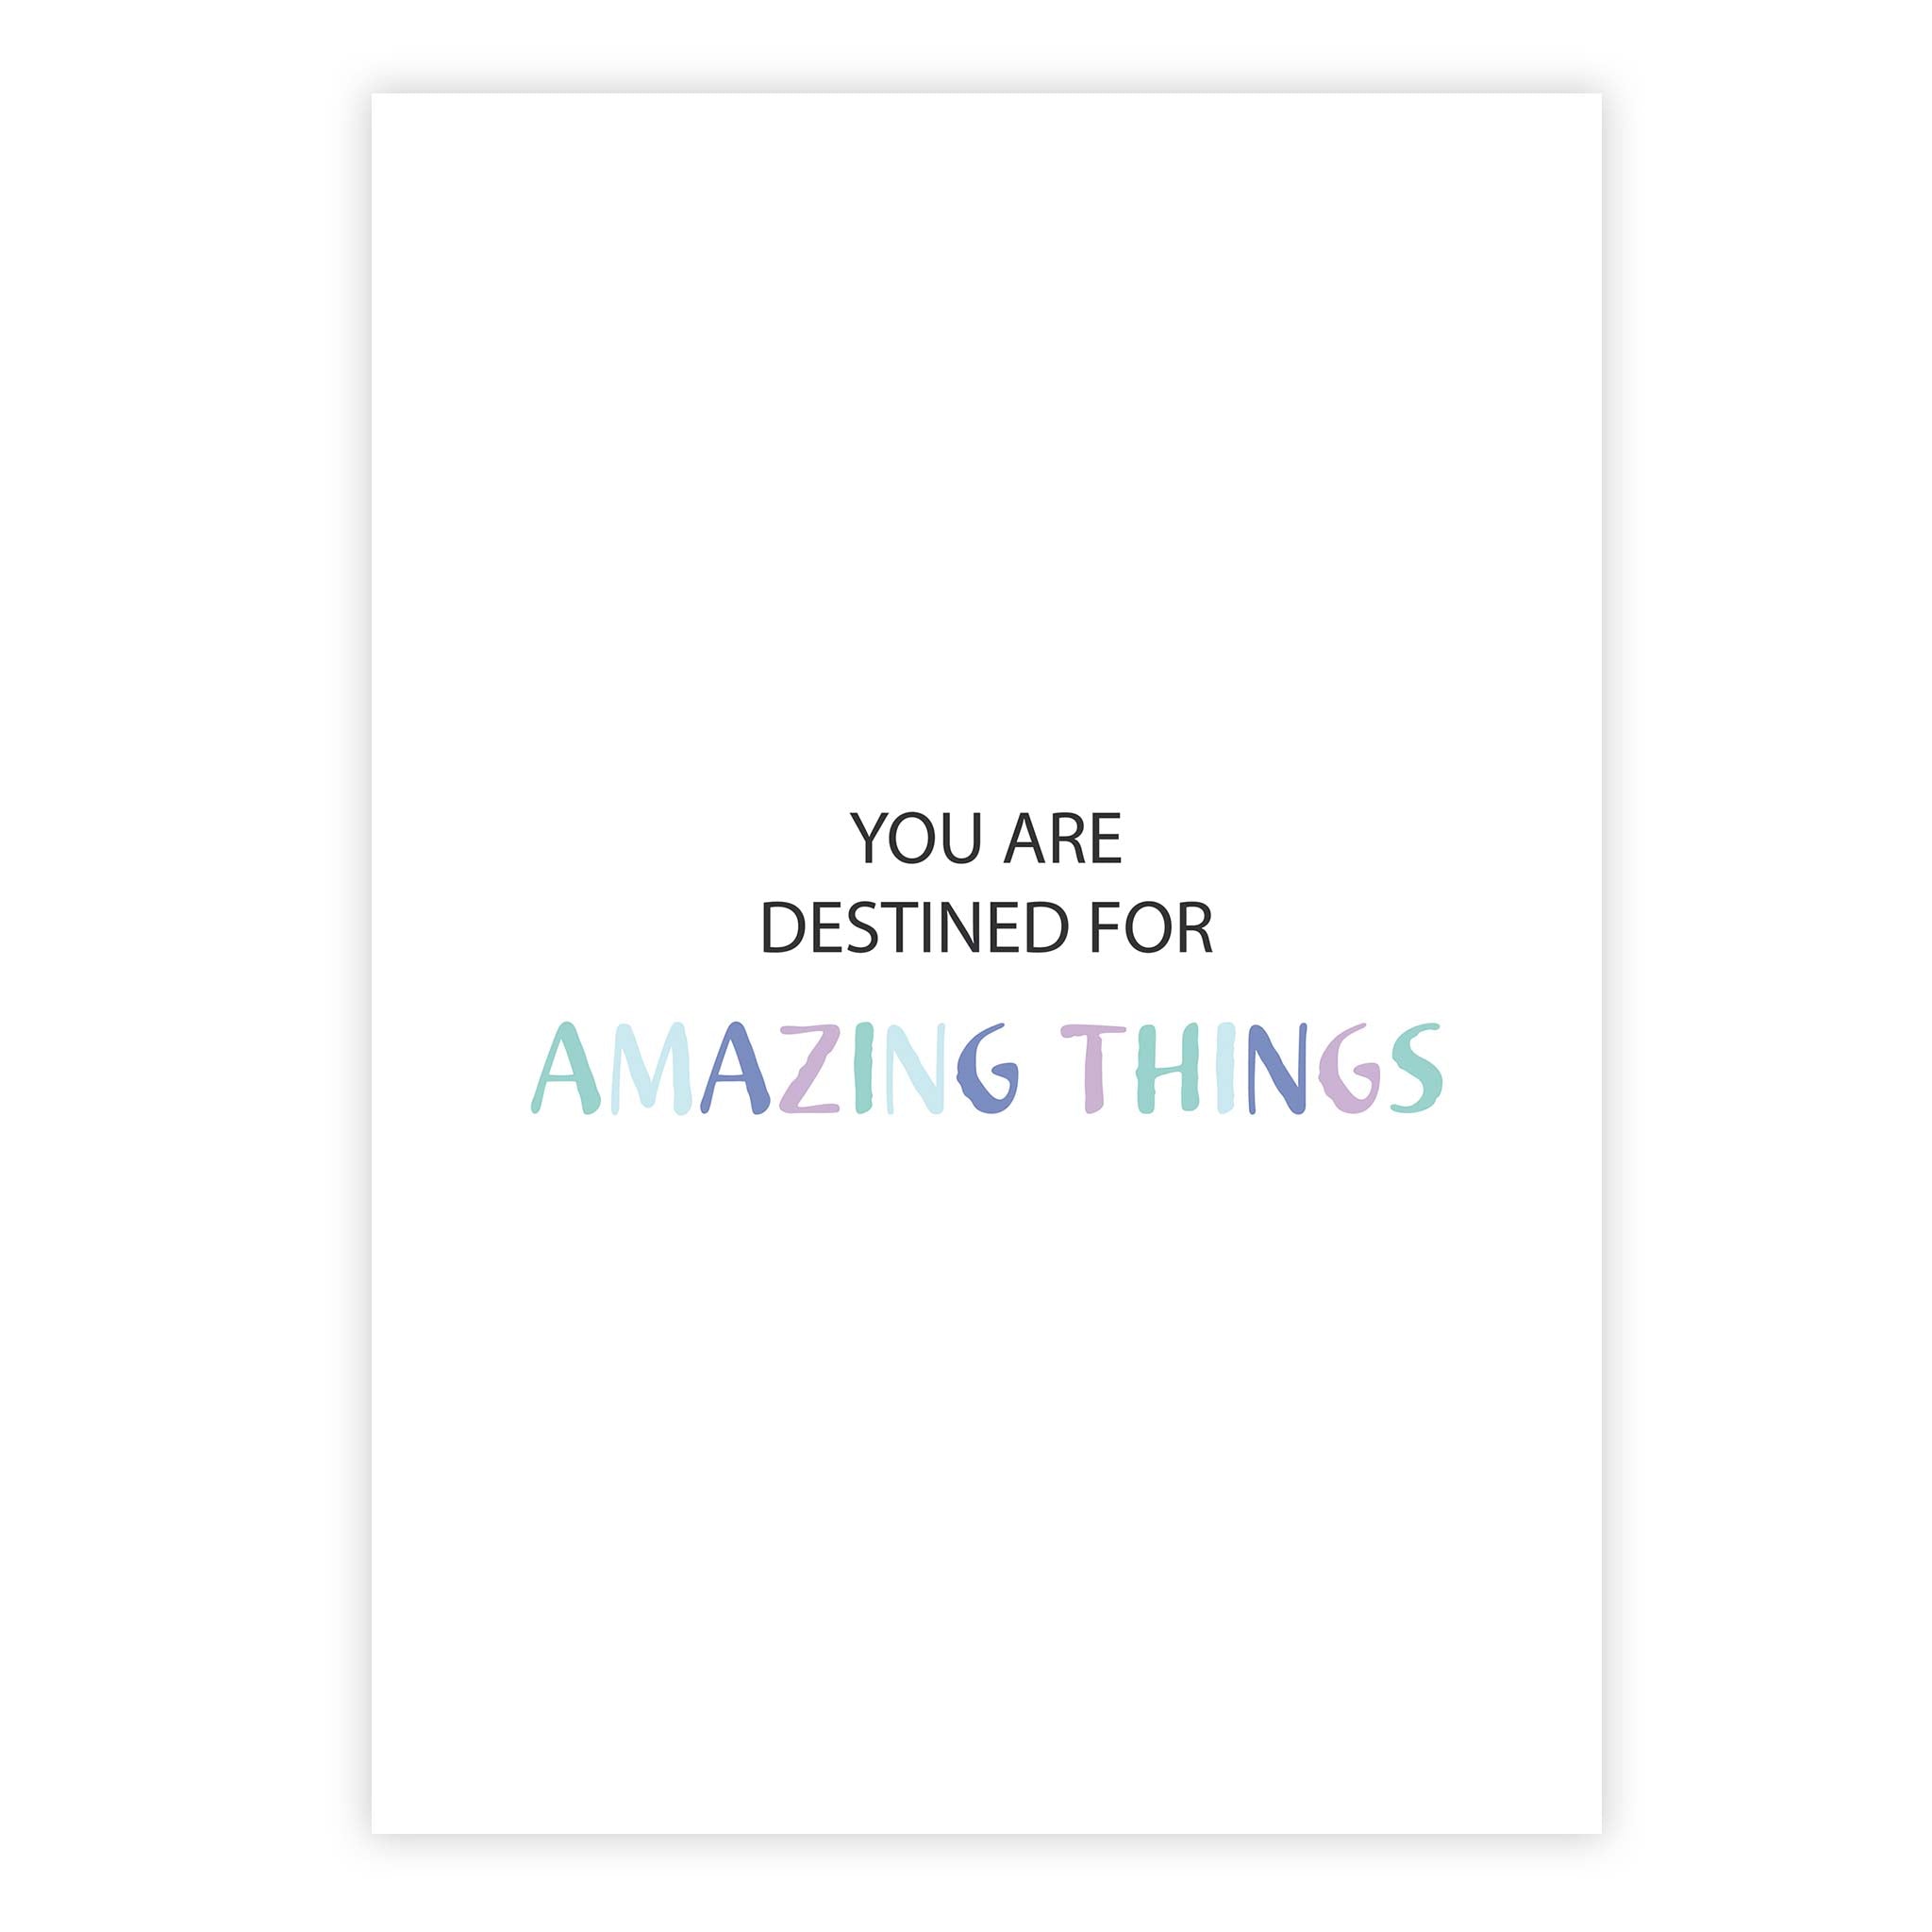 You are destined for amazing things